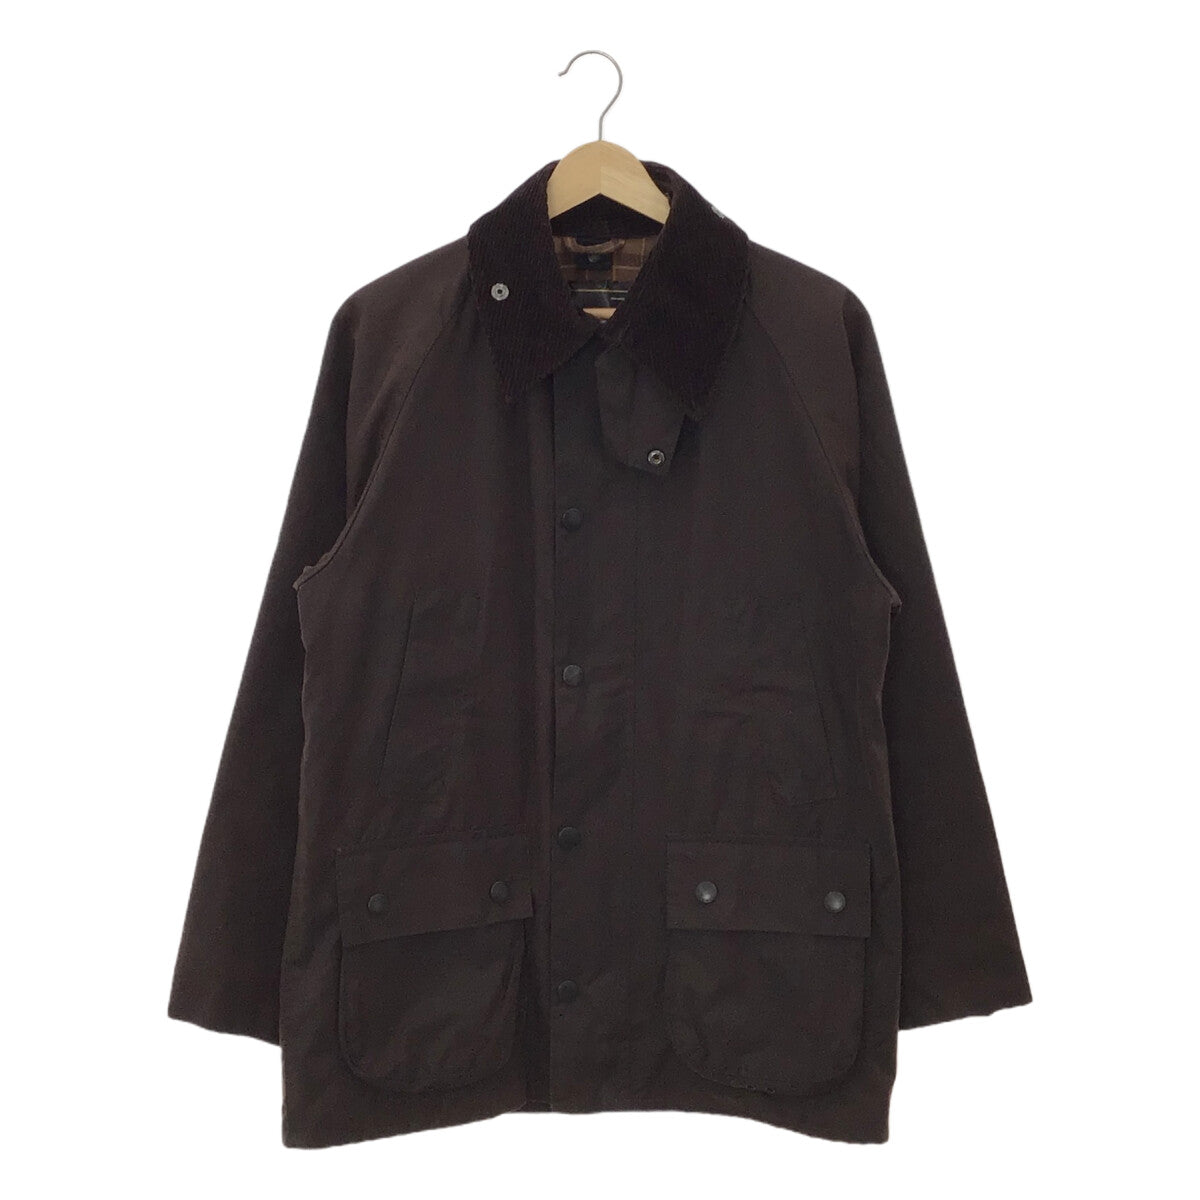 barbour bedale ピーチ + ファーライナー 40袖丈も教えて頂けますか